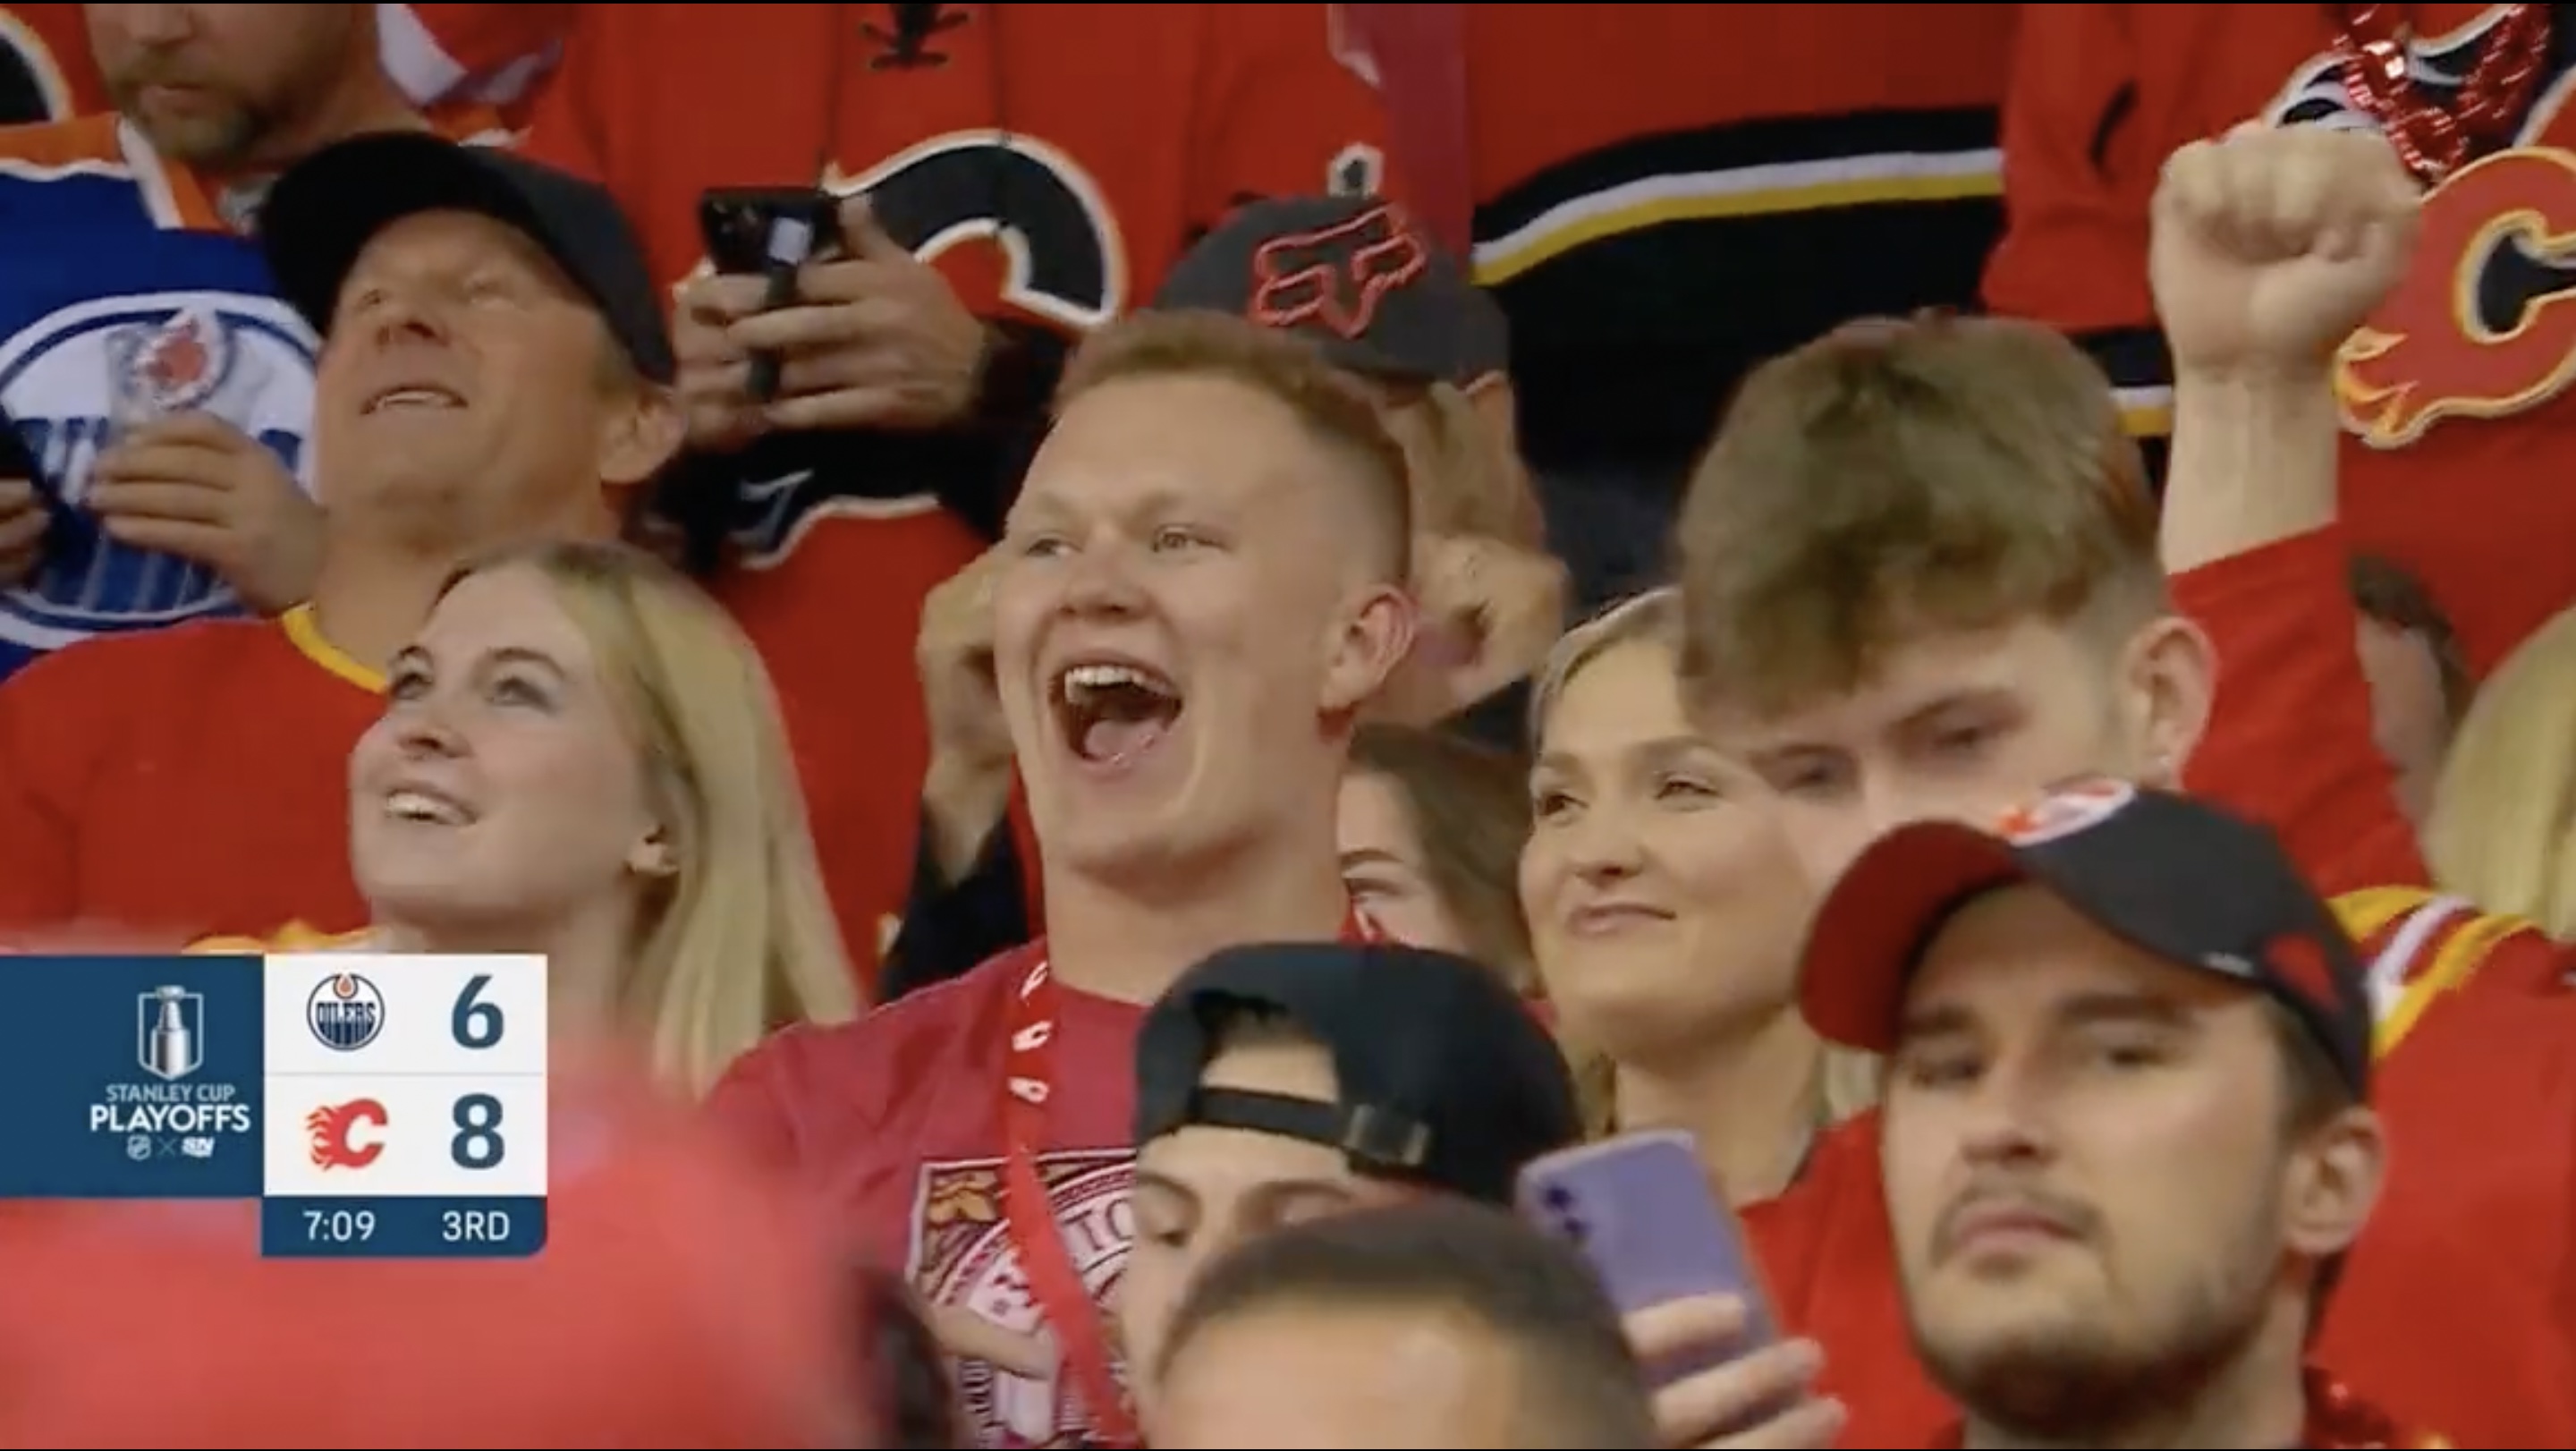 Brady Tkachuk cheering on Flames, brother is best NHL playoffs story